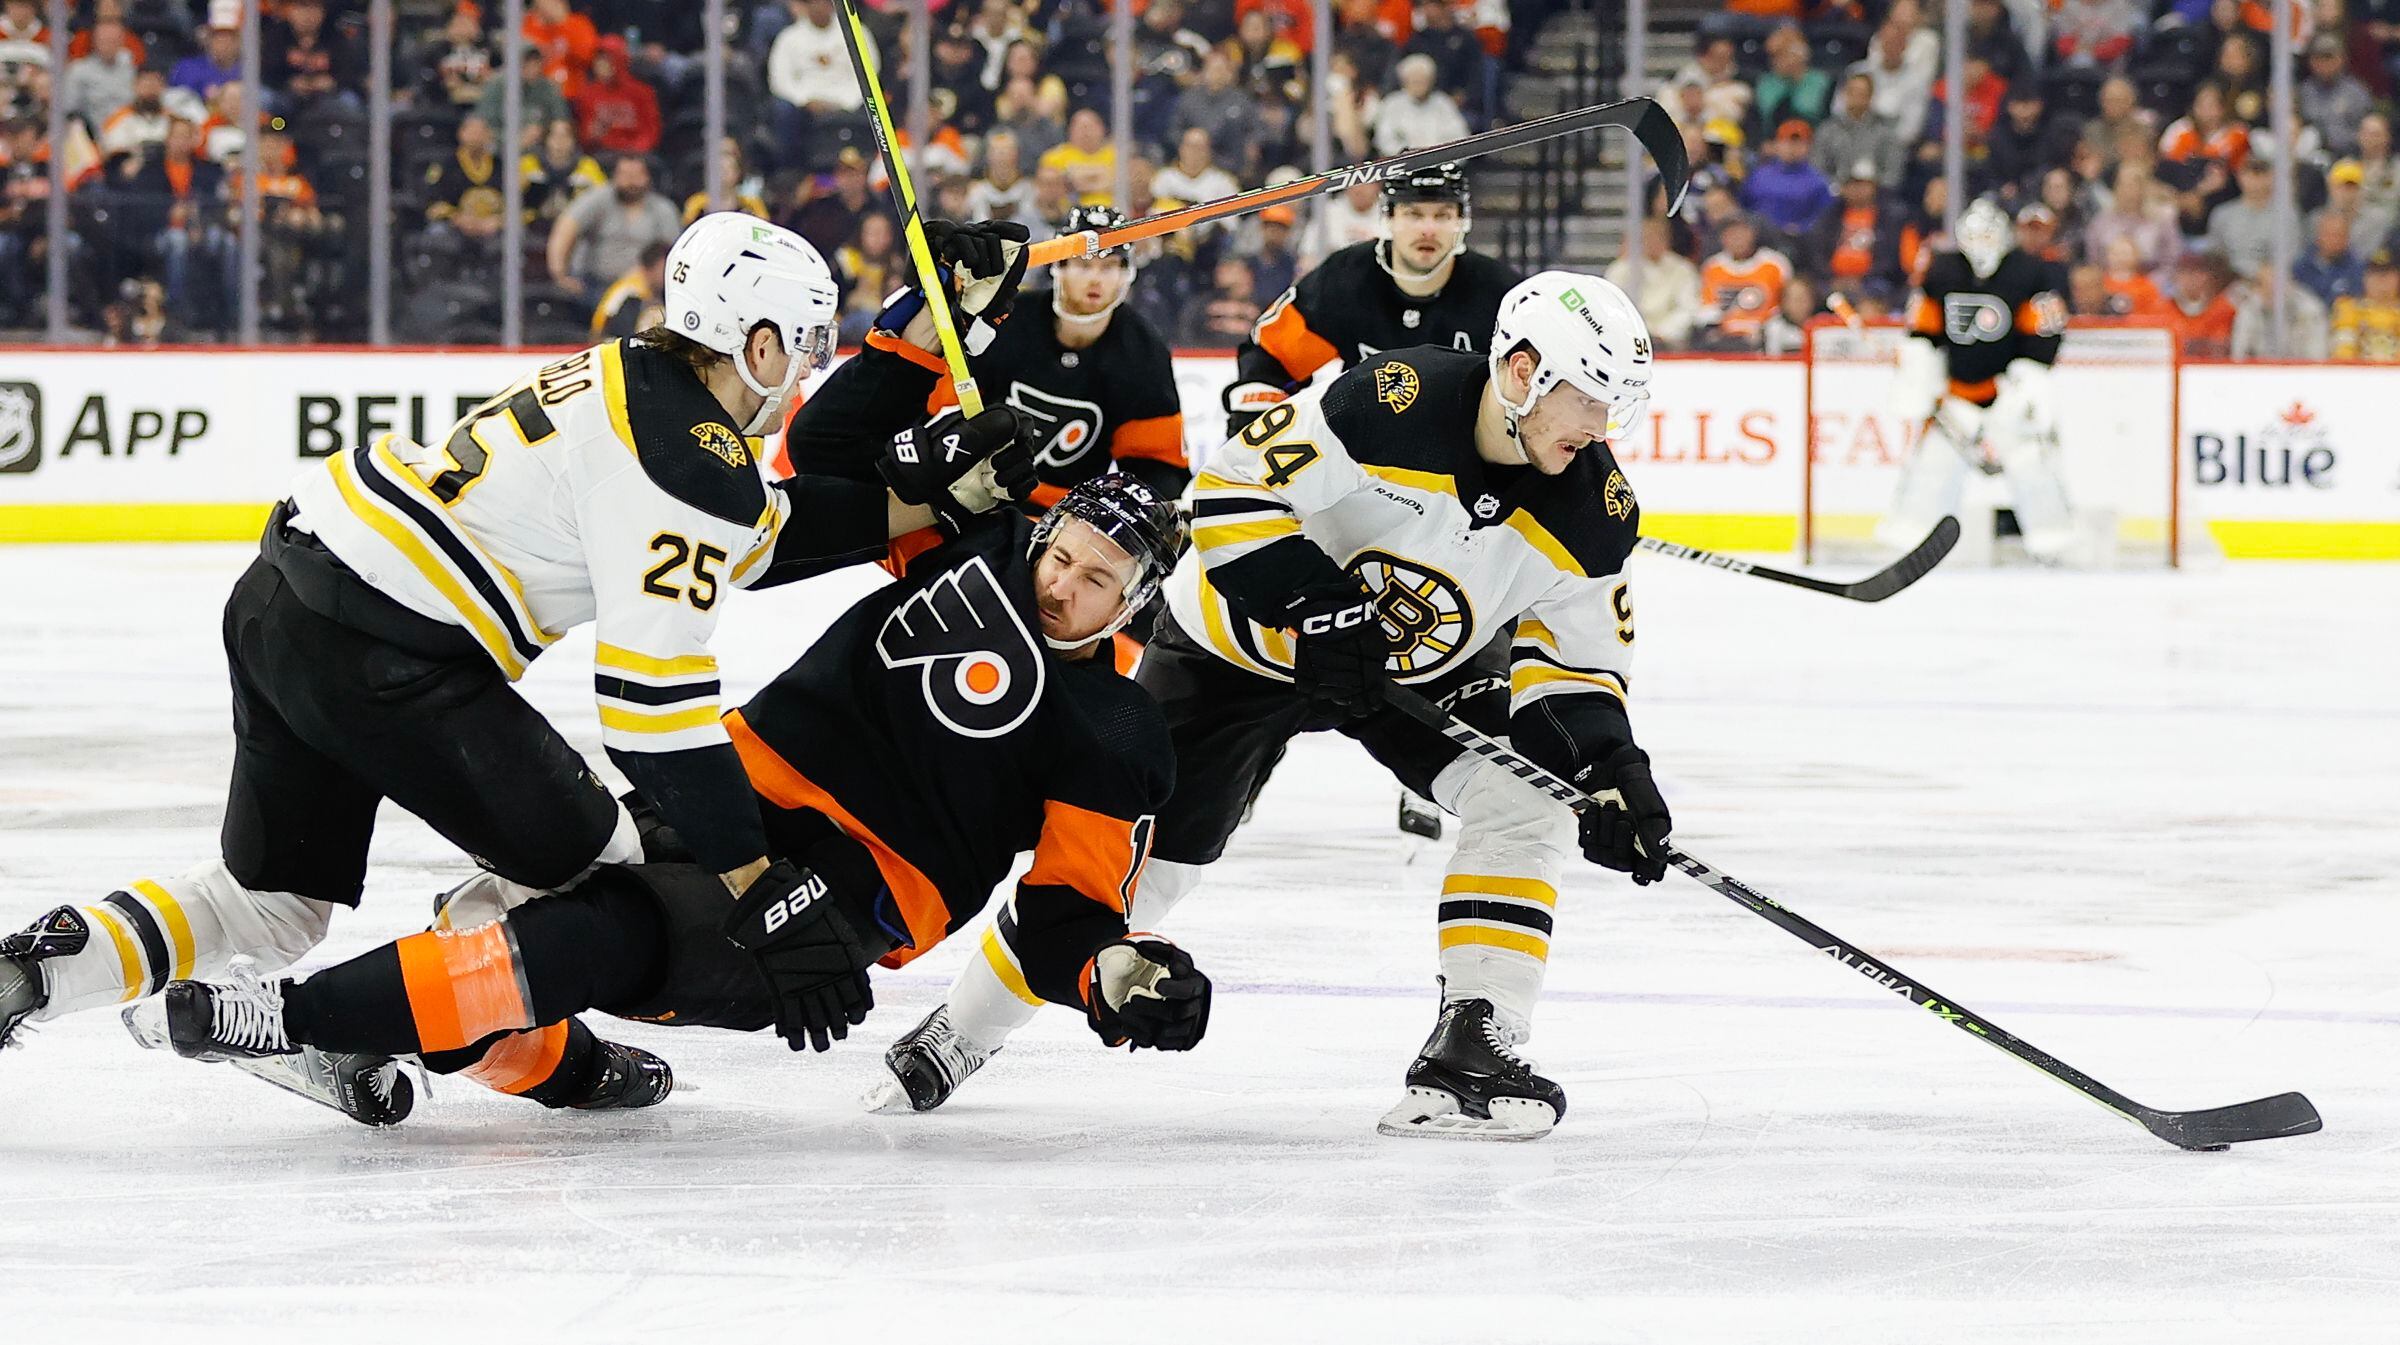 Boston Bruins hope to finish the job this season after record